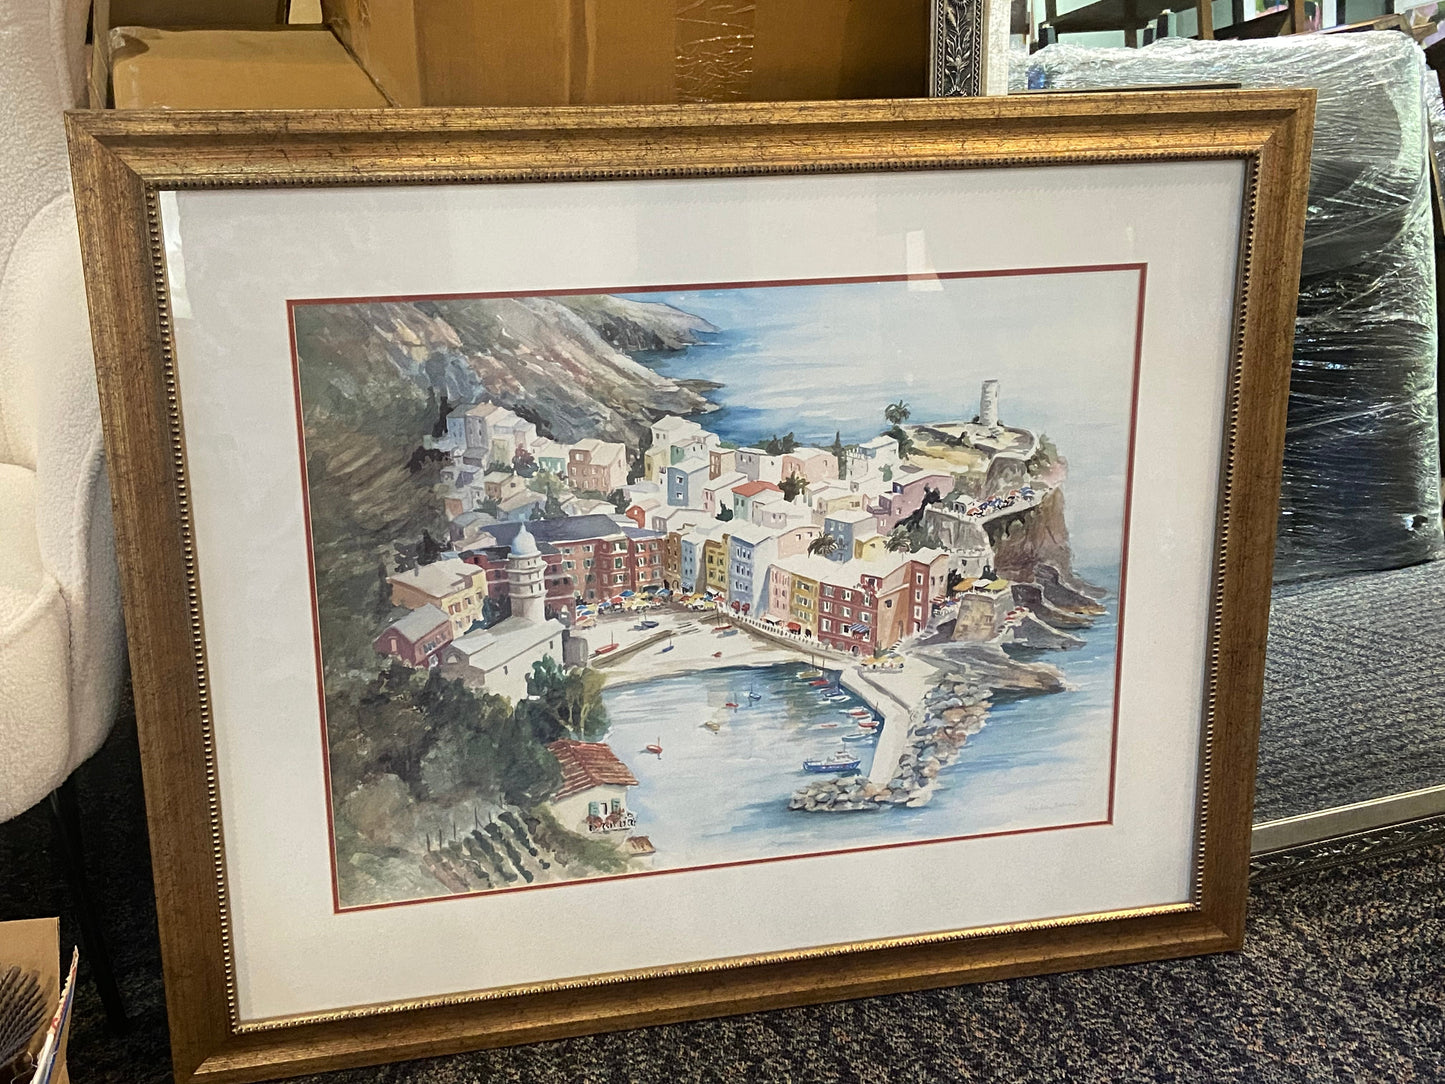 Vernazza Italy Painting in Golden Frame 42" X 35"